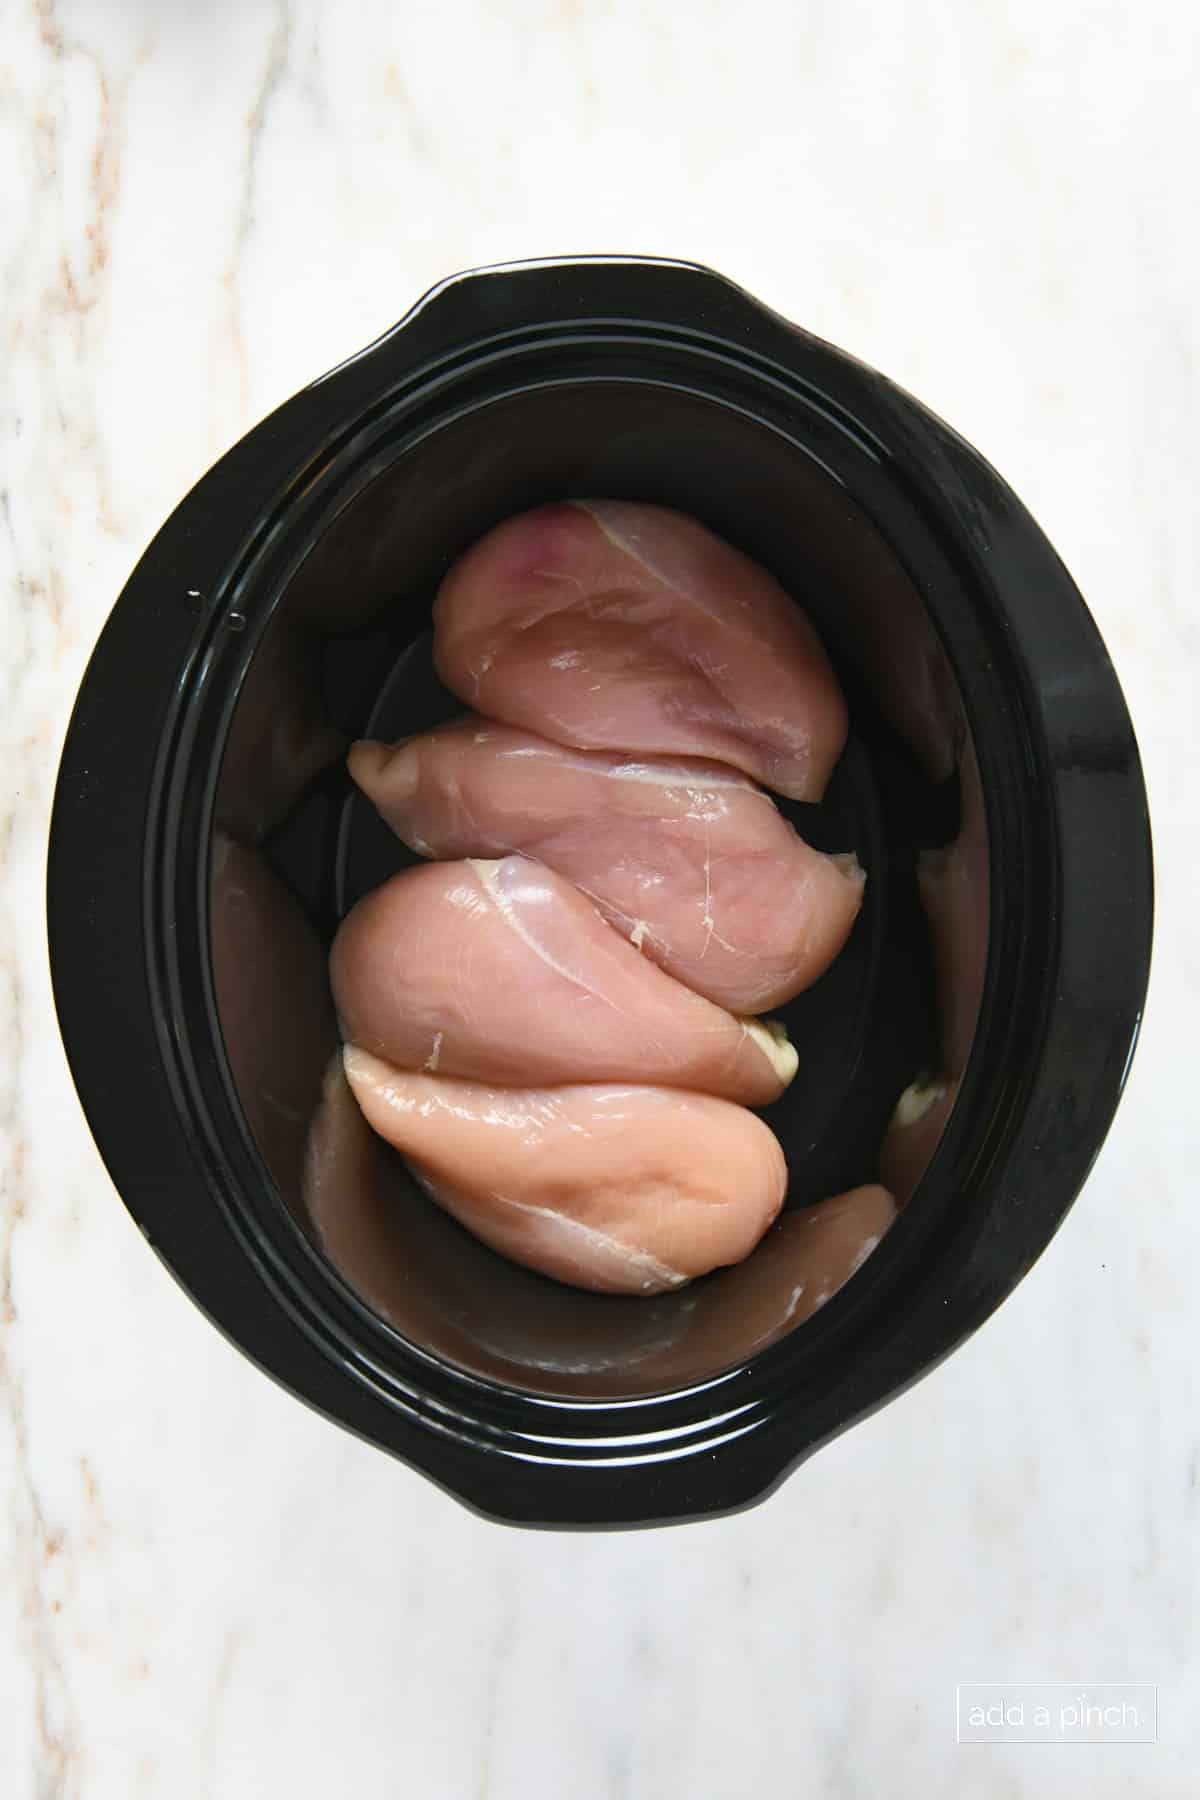 Chicken breasts in a pot to cook.